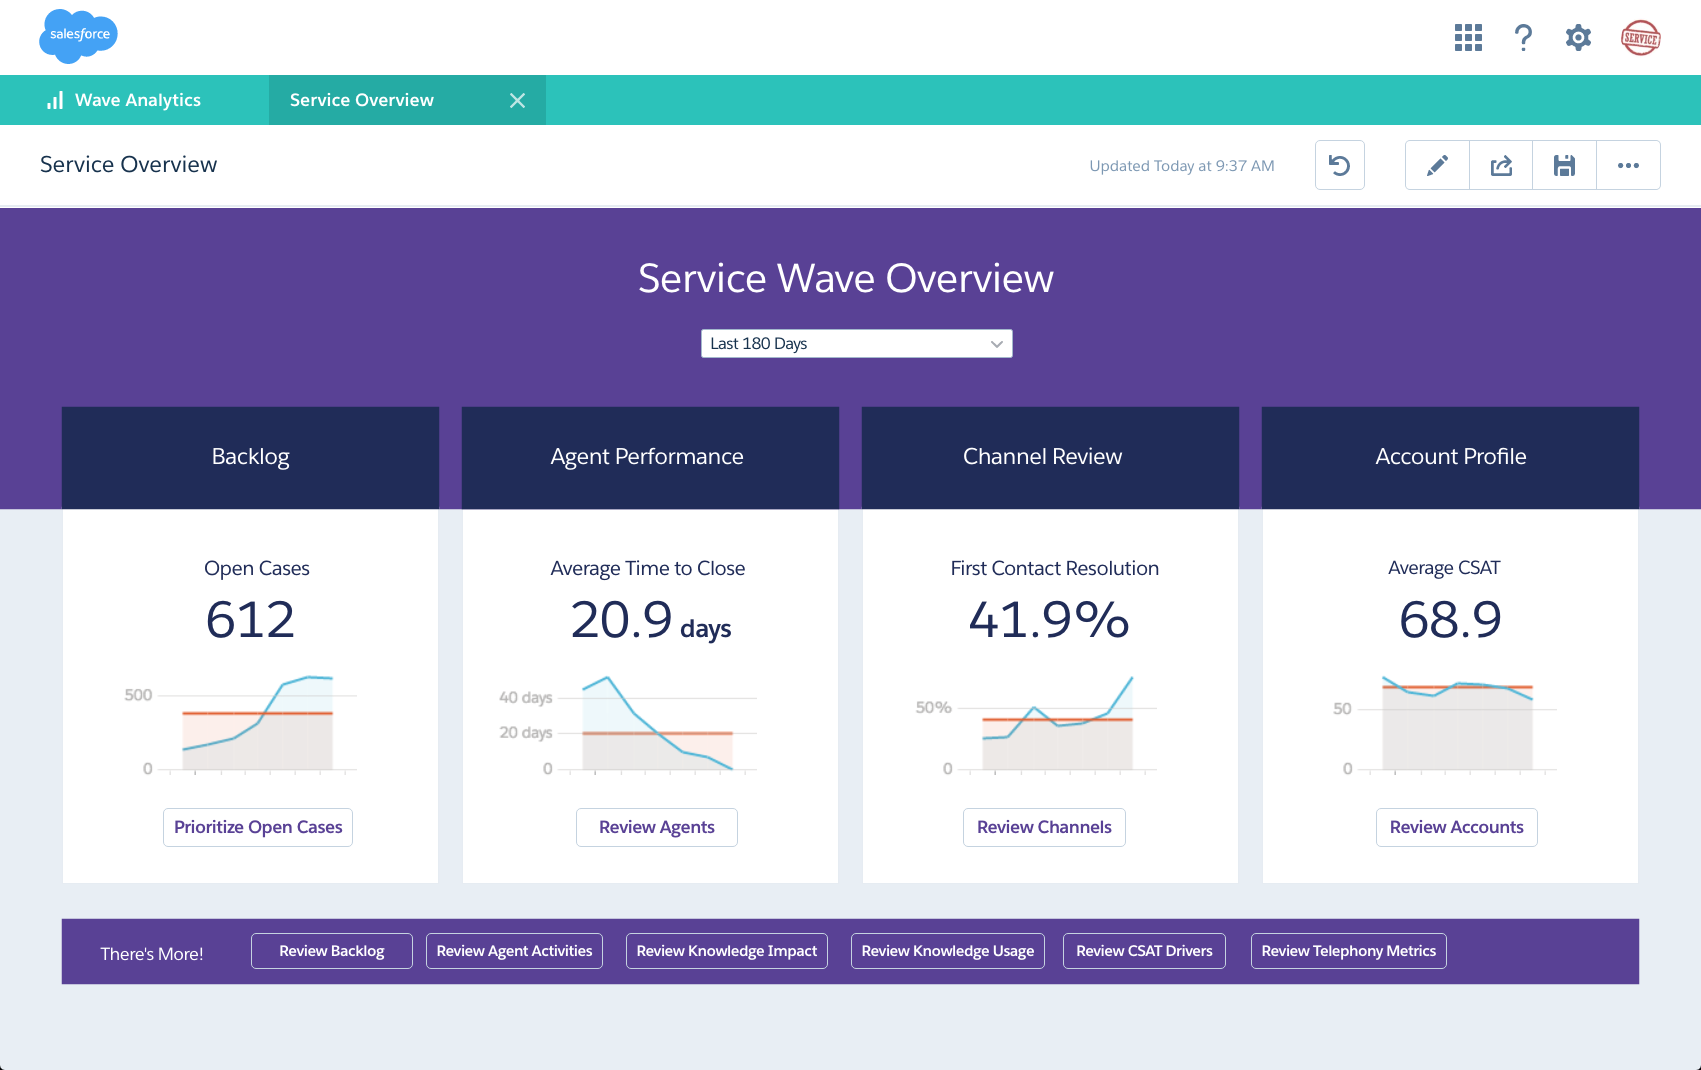 Salesforce Extends Wave Analytics With New Apps for Service and IT